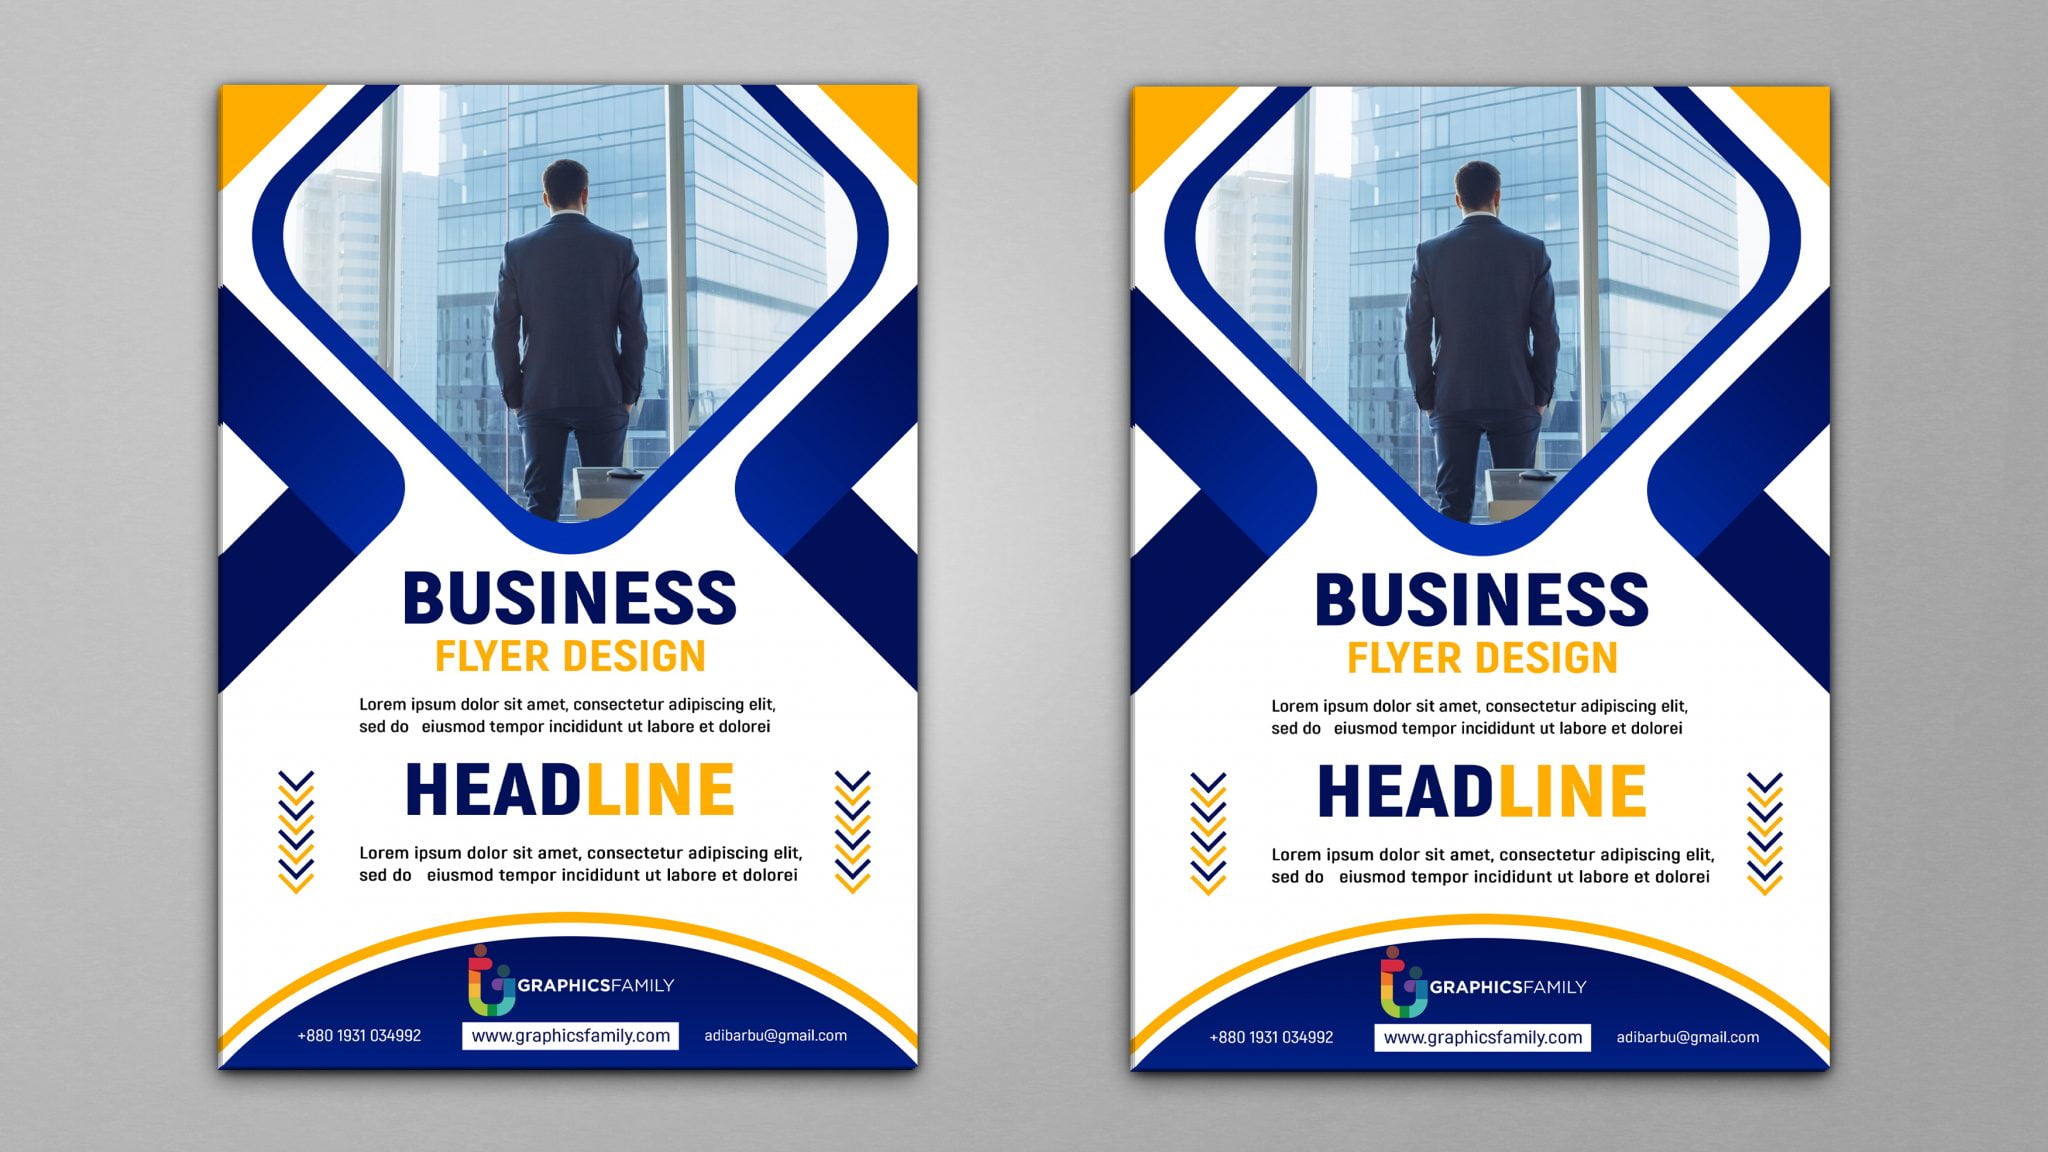 Free Business Flyer Design Template GraphicsFamily